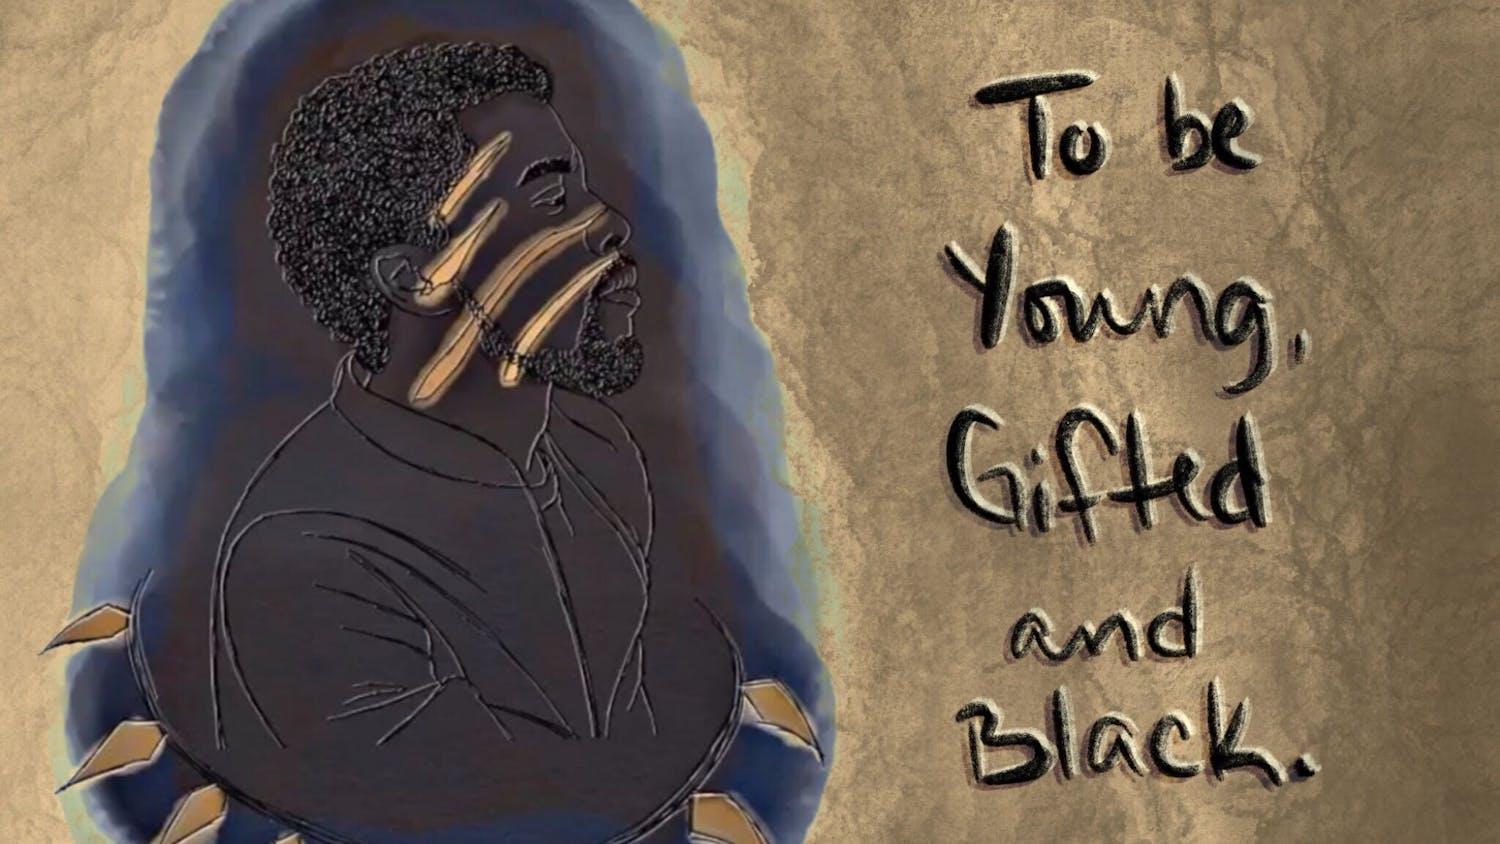 To be young, gifted and Black